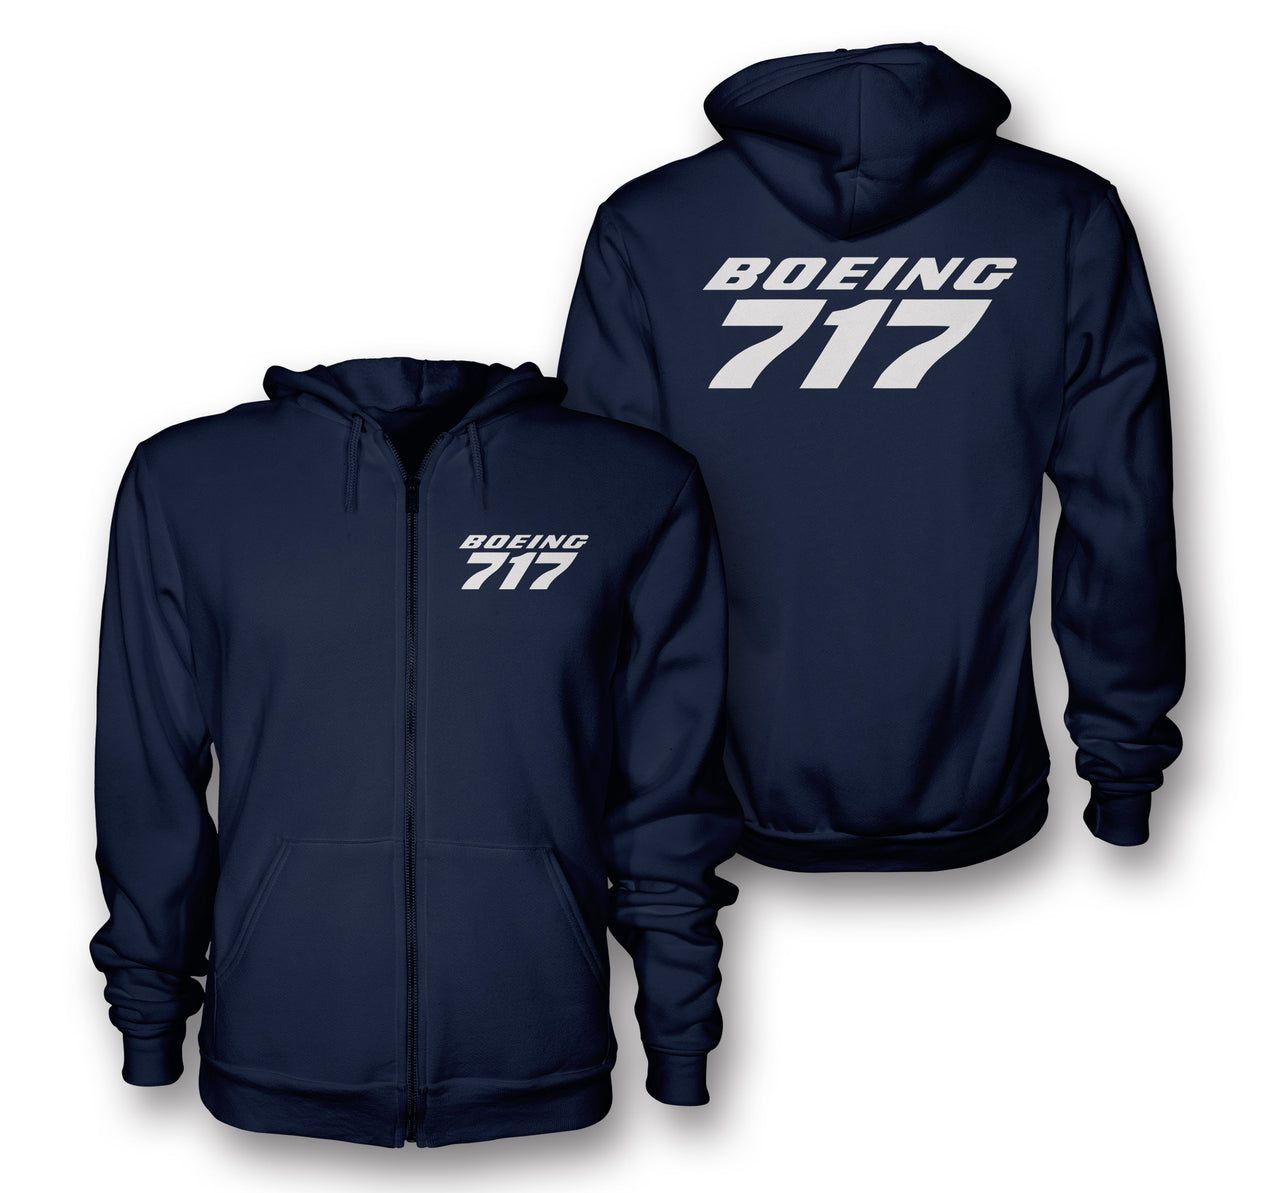 Boeing 717 & Text Designed Zipped Hoodies